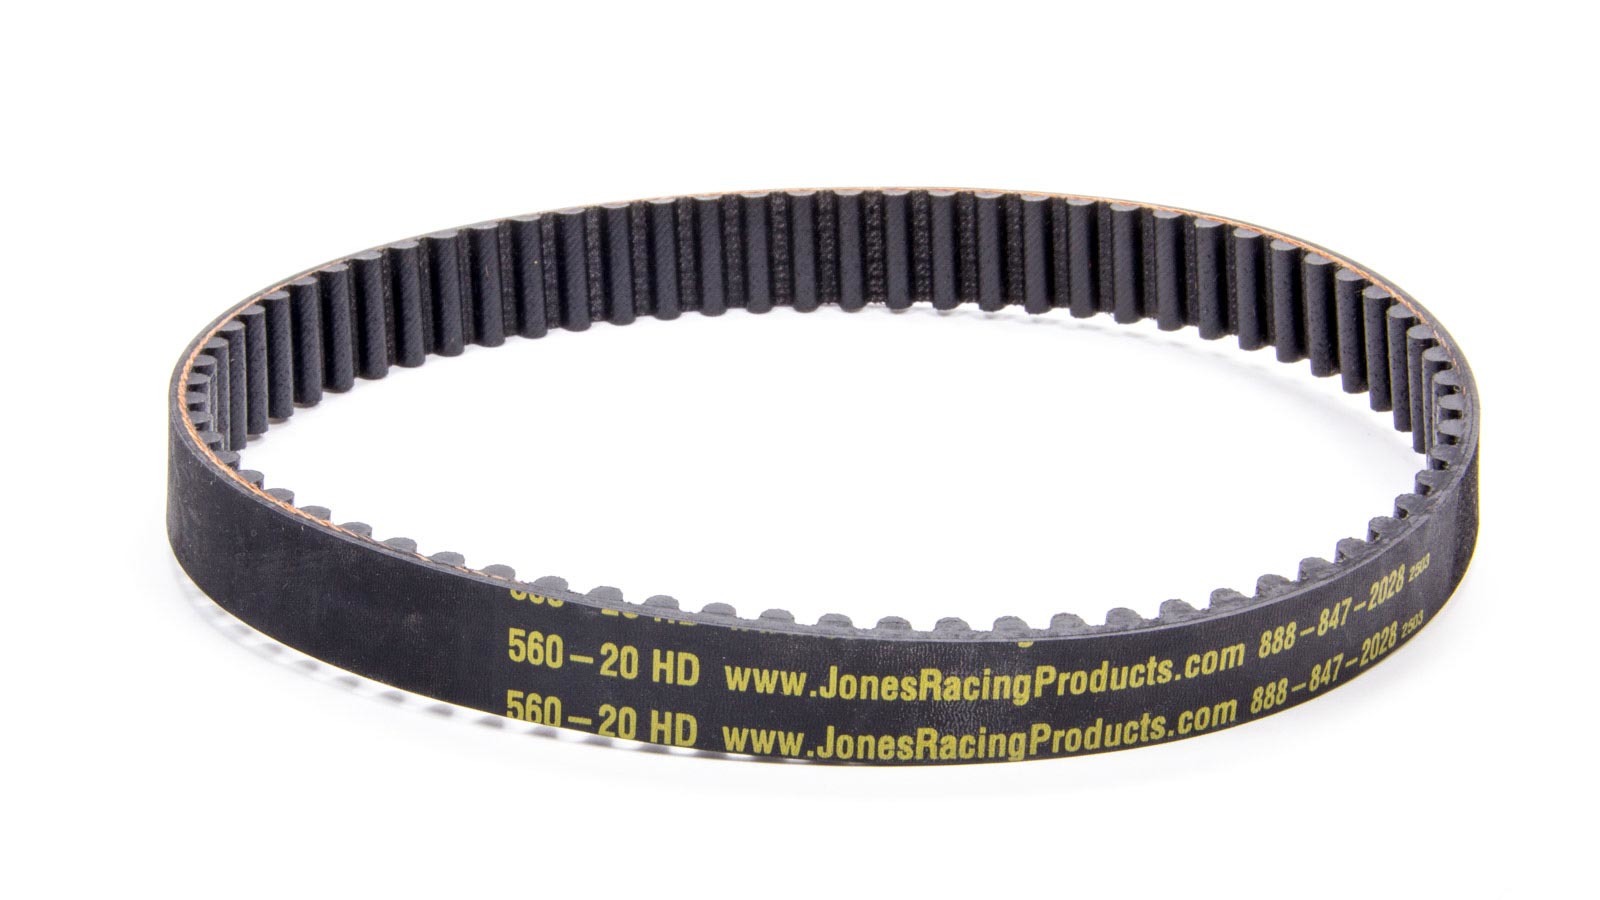 Jones Racing Products 736-20HD HTD Drive Belt, 28.980 in Long, 20 mm Wide, 8 mm Pitch, Each